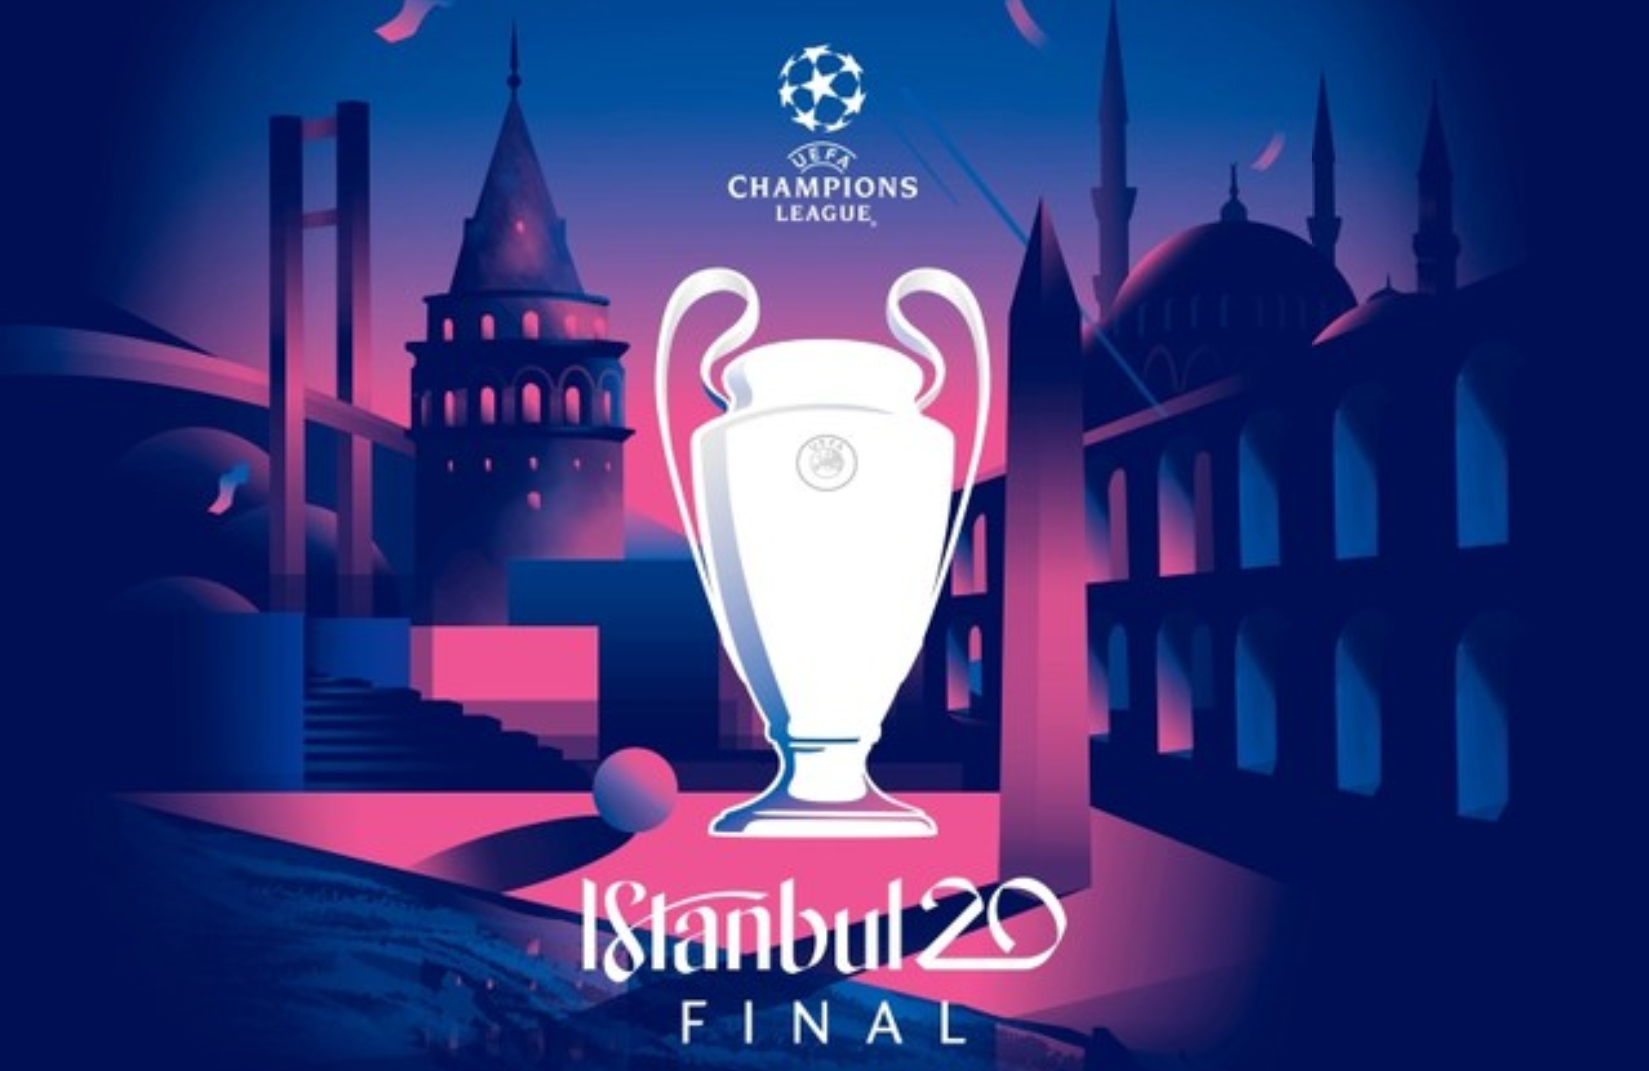 UEFA onthult logo voor Champions League-finale in ...